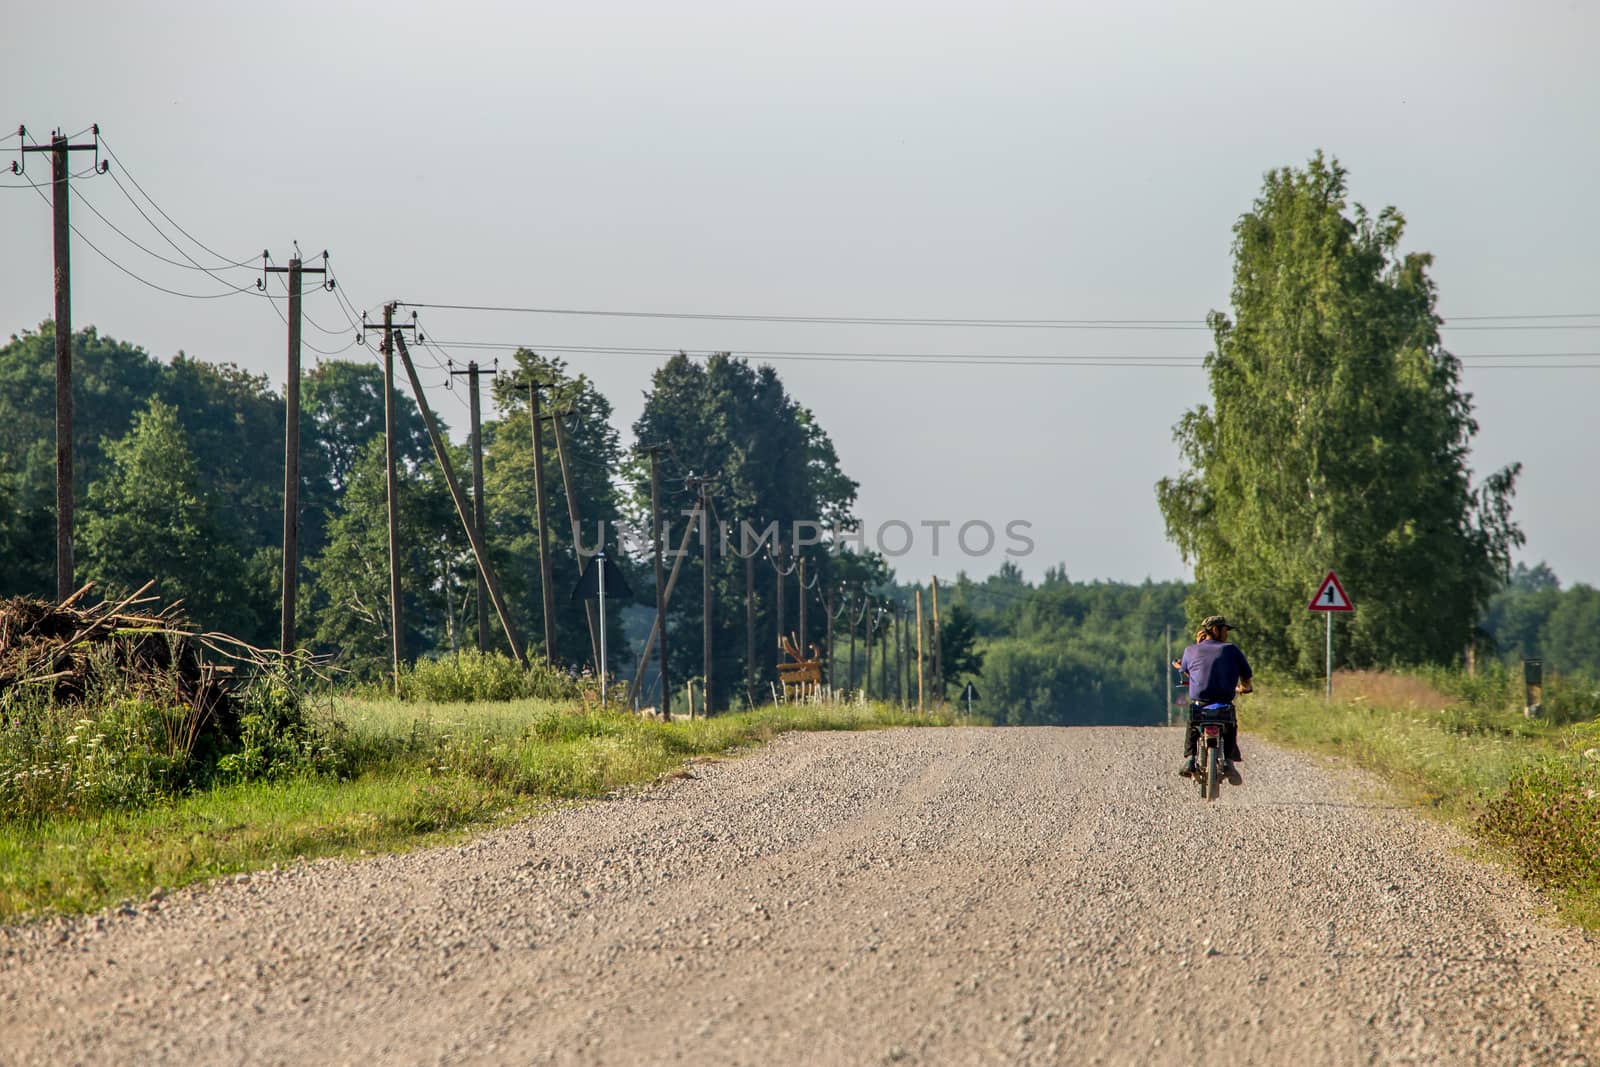 Summer landscape with road, trees and blue sky. Man ride to the moped on countryside road. Rural road, cornfield, wood and cloudy blue sky. Classic rural landscape in Latvia.